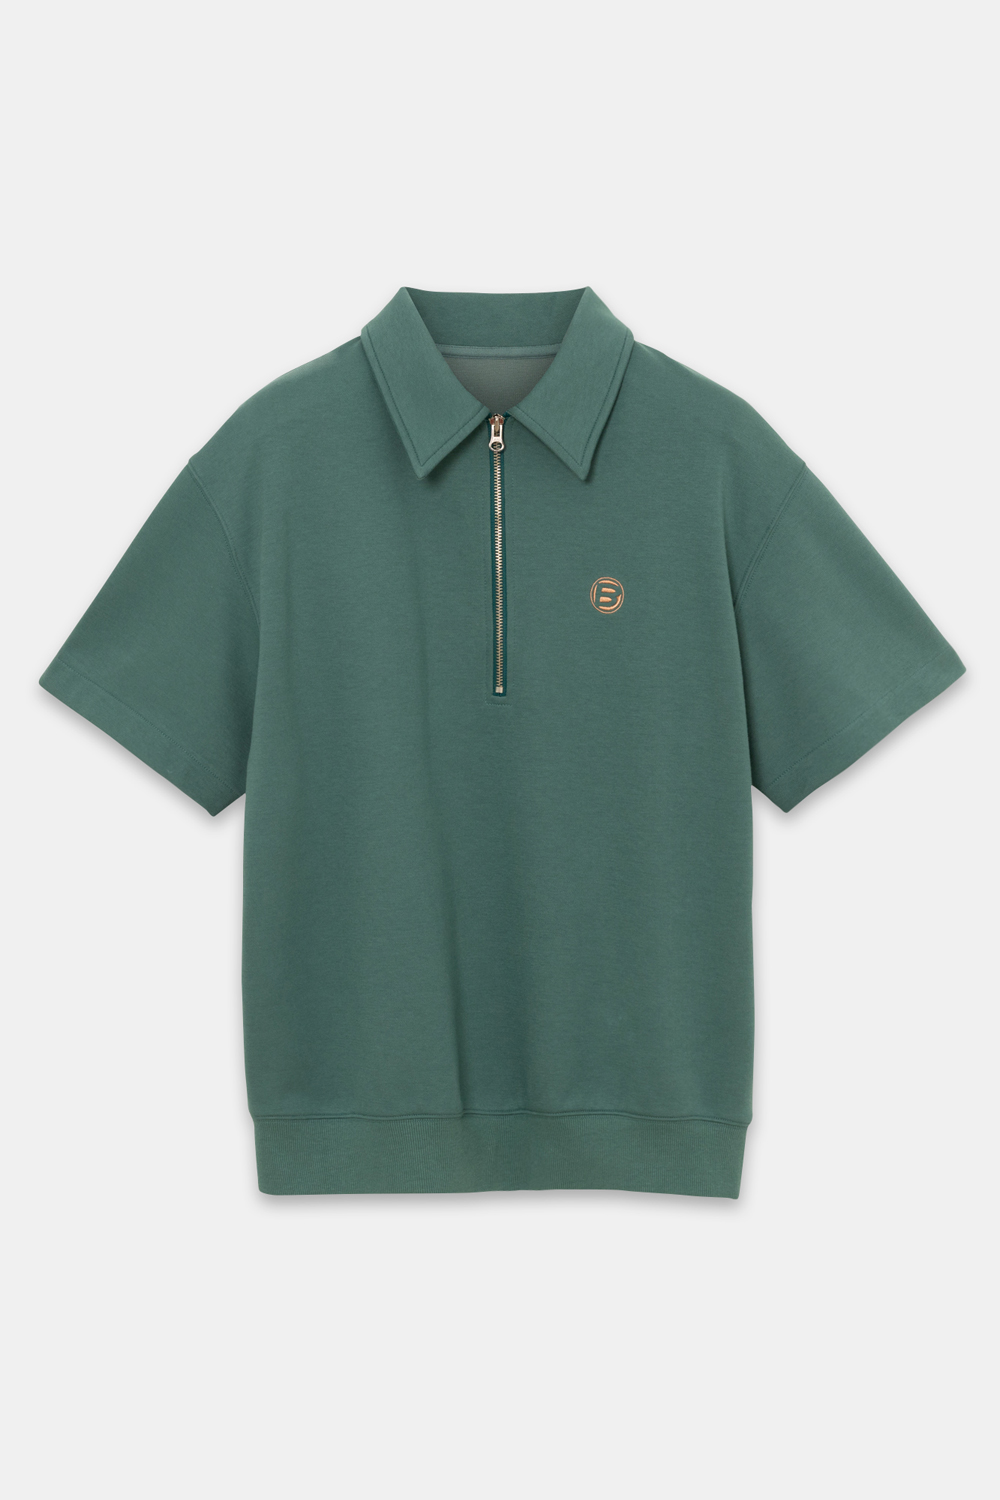 STAND NECK SHORT SLEEVE MAN TO MAN - GREEN